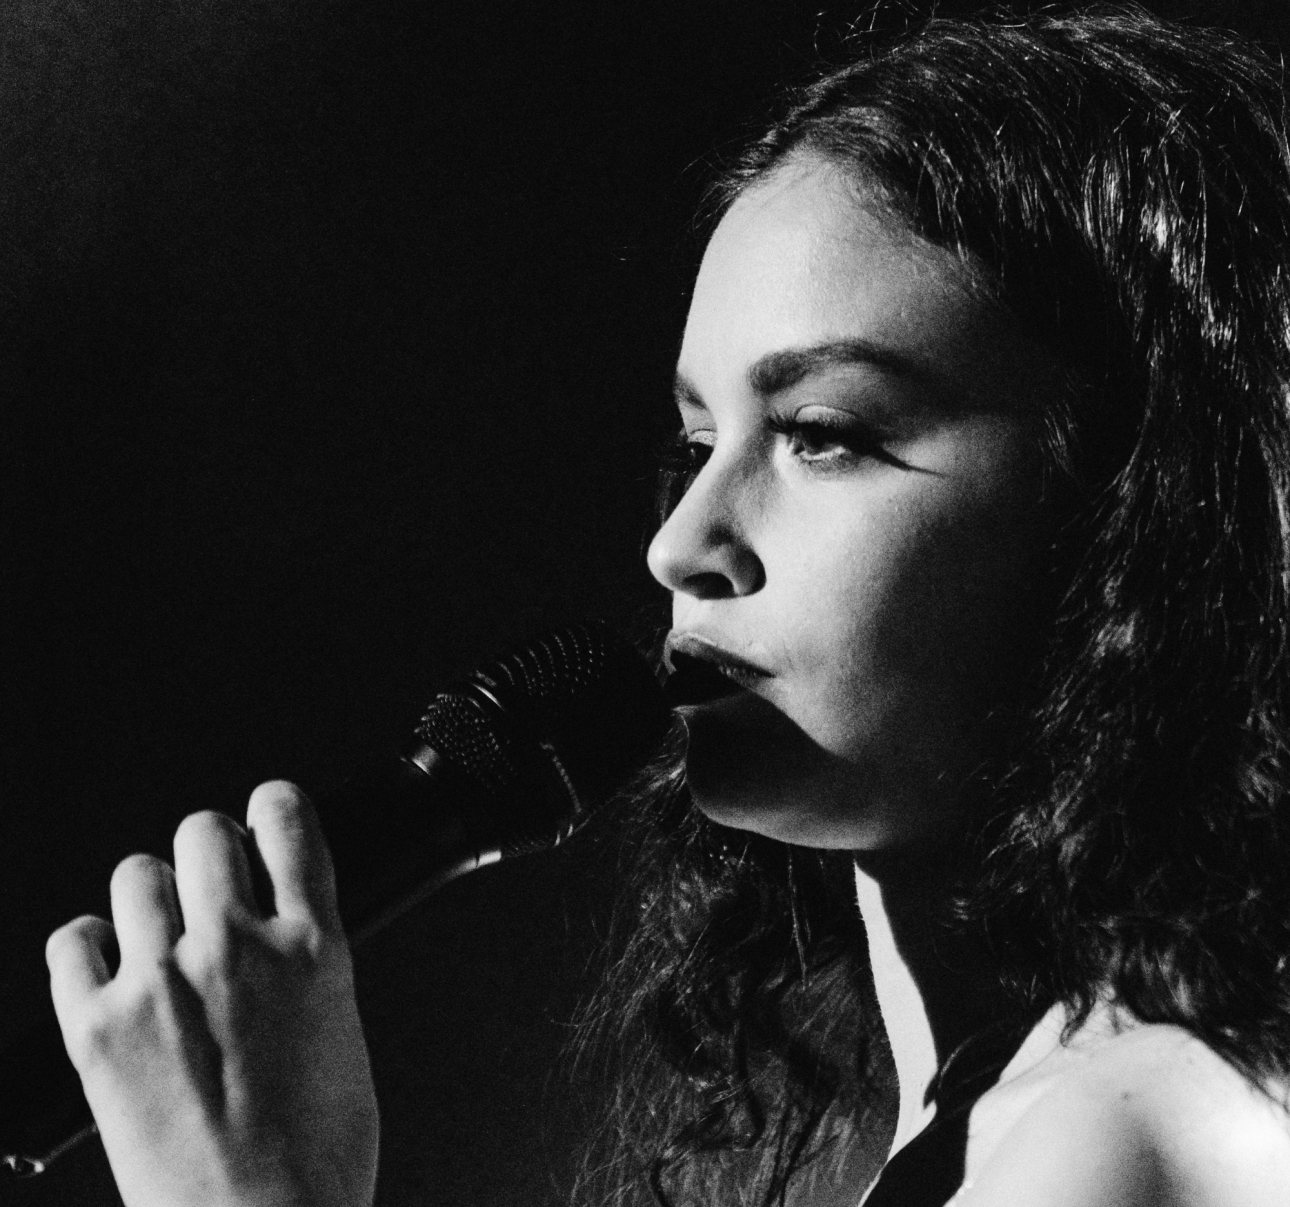 Sabrina Claudio reveals her super sensual side on intimate new track "...